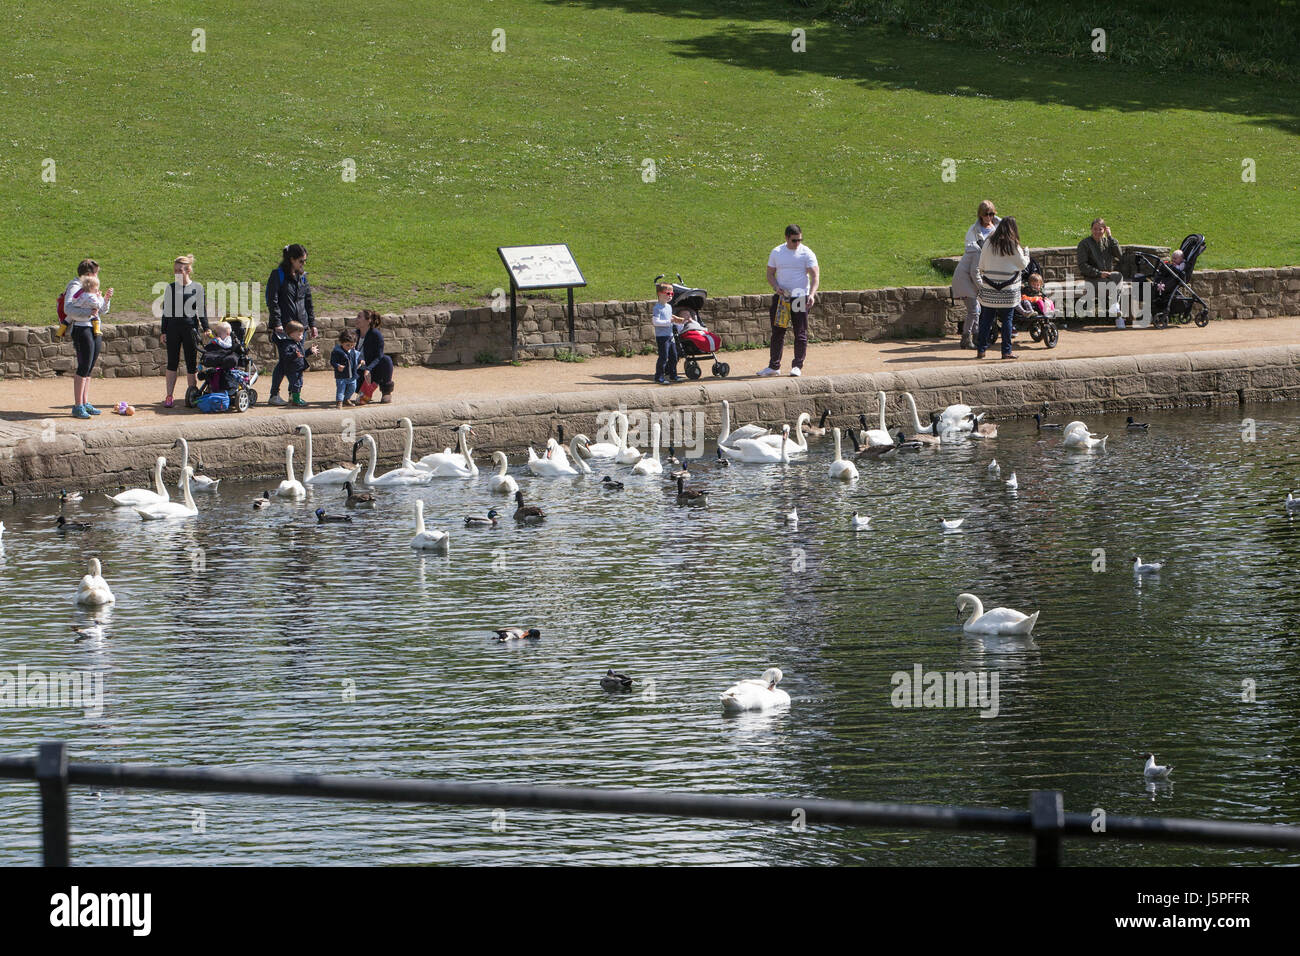 Leeds, UK. 18th May, 2017. Children feeding the ducks and swans at Roundhay Park in Leeds on 18 May 2017.  A bright and sunny day brings welcome relief from the clouds and heavy rain earlier in the week. Credit: James Copeland/Alamy Live News Stock Photo